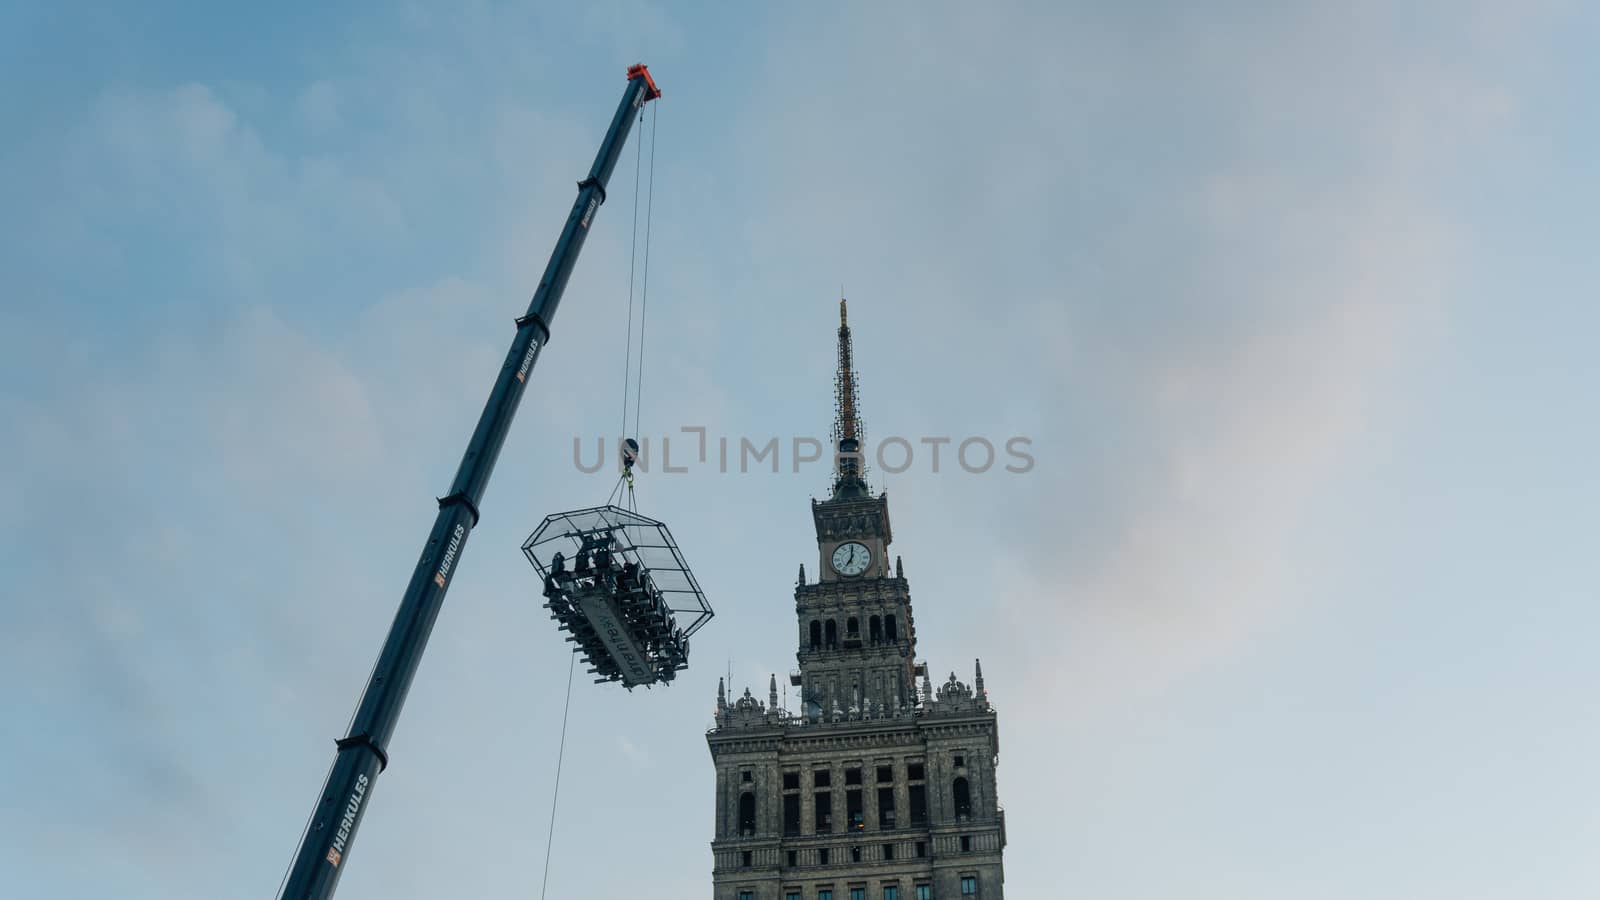 POLAND, KRAKOW - SEP 02, 2016: Warsaw city center with Palace of Culture and Science, the tallest building in Poland and the eighth tallest building in the EU